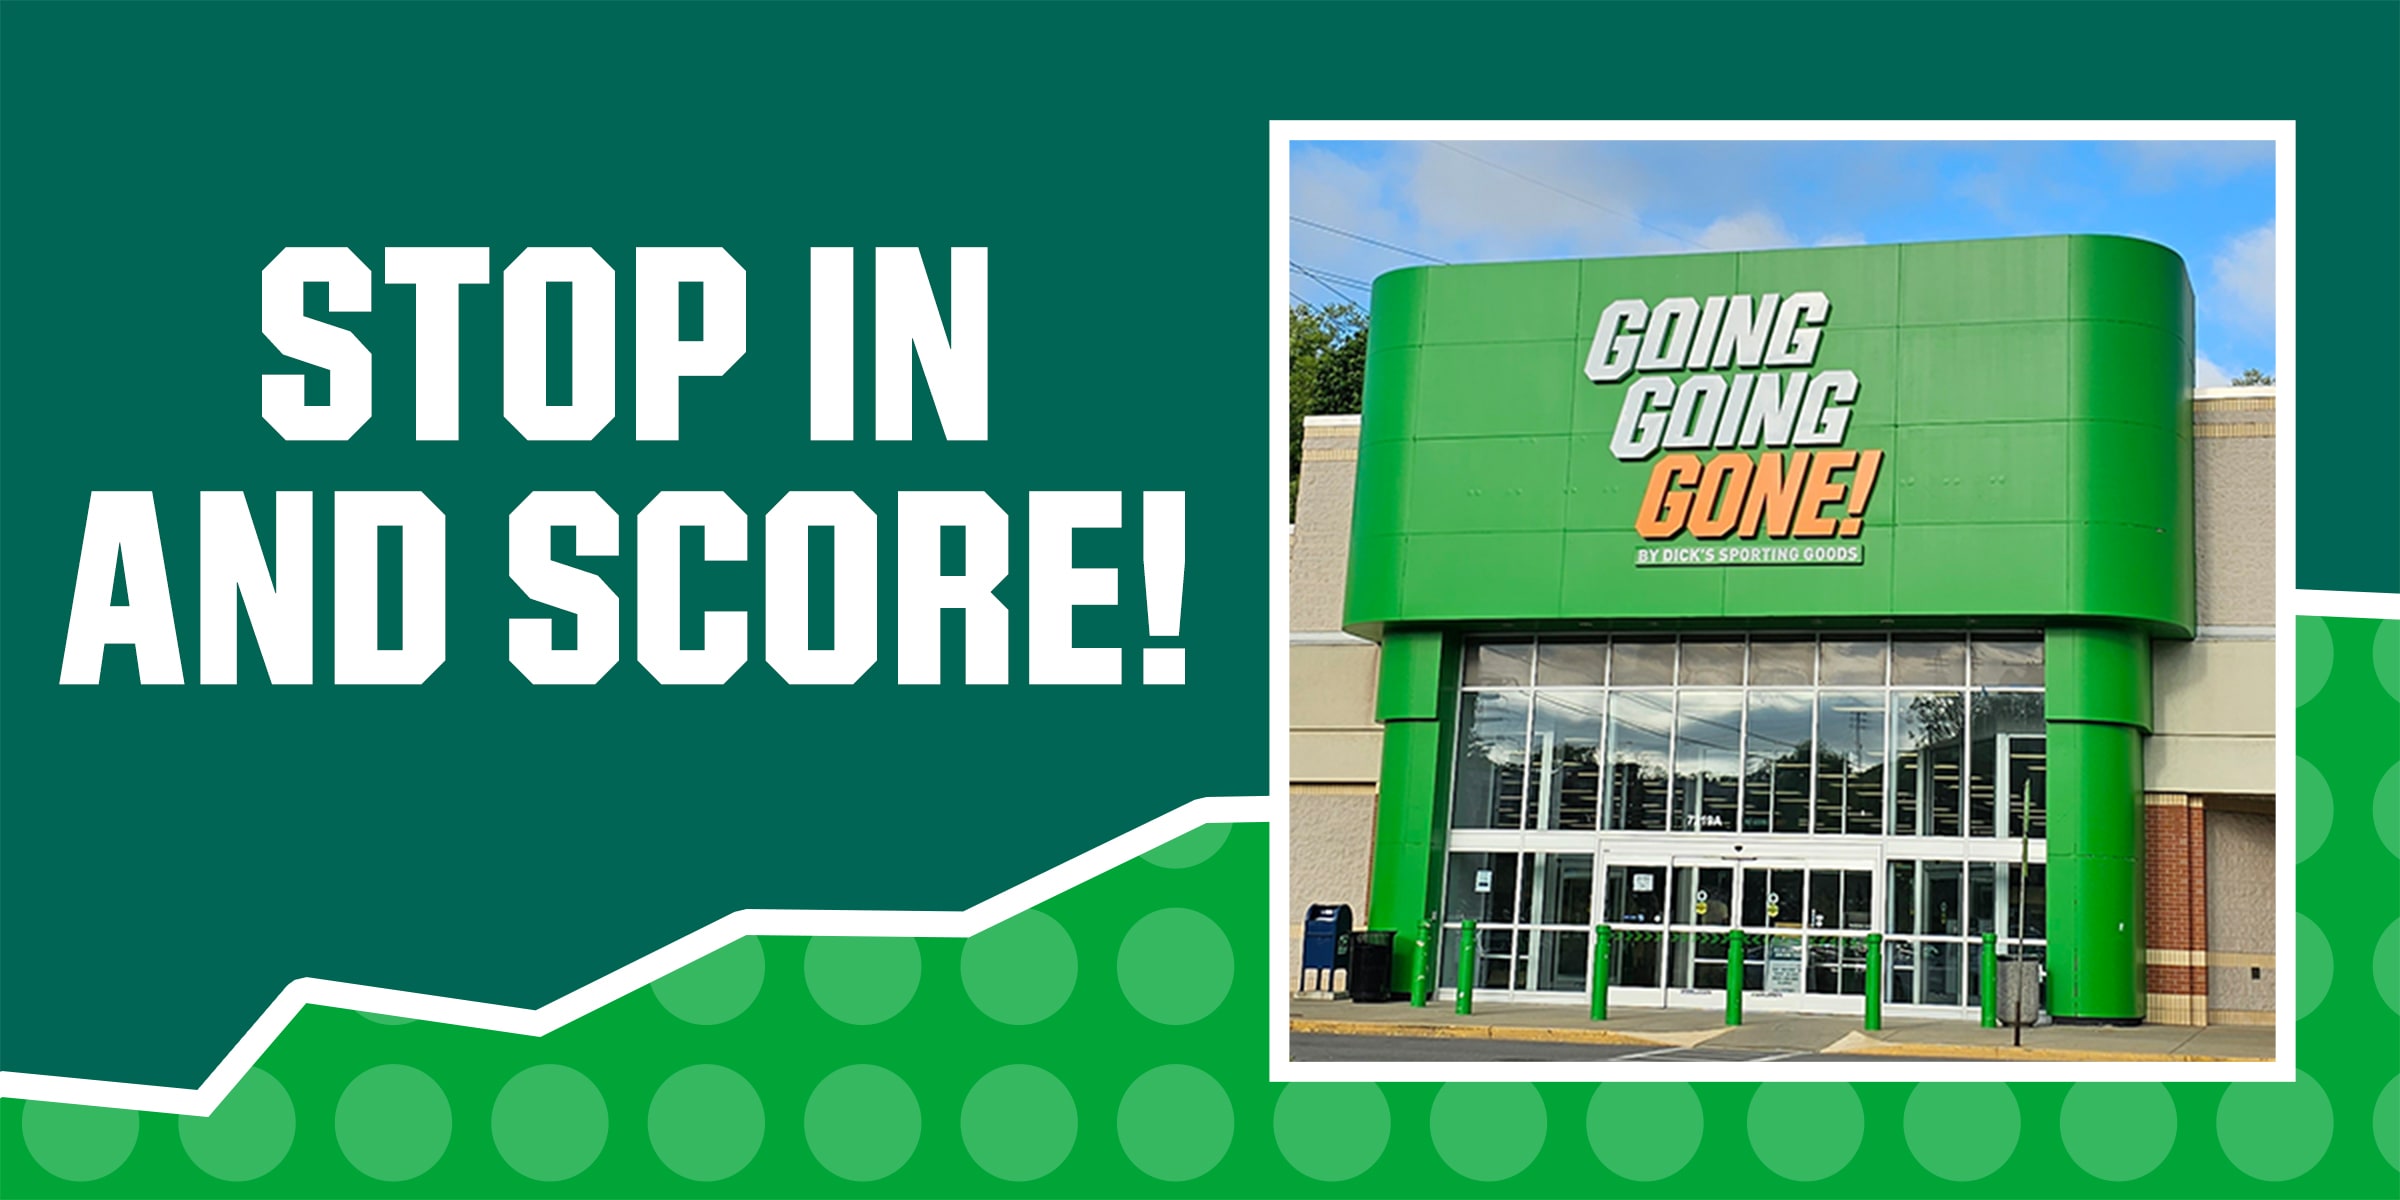 Stop in and score. Going Going Gone by Dick's Sporting Goods